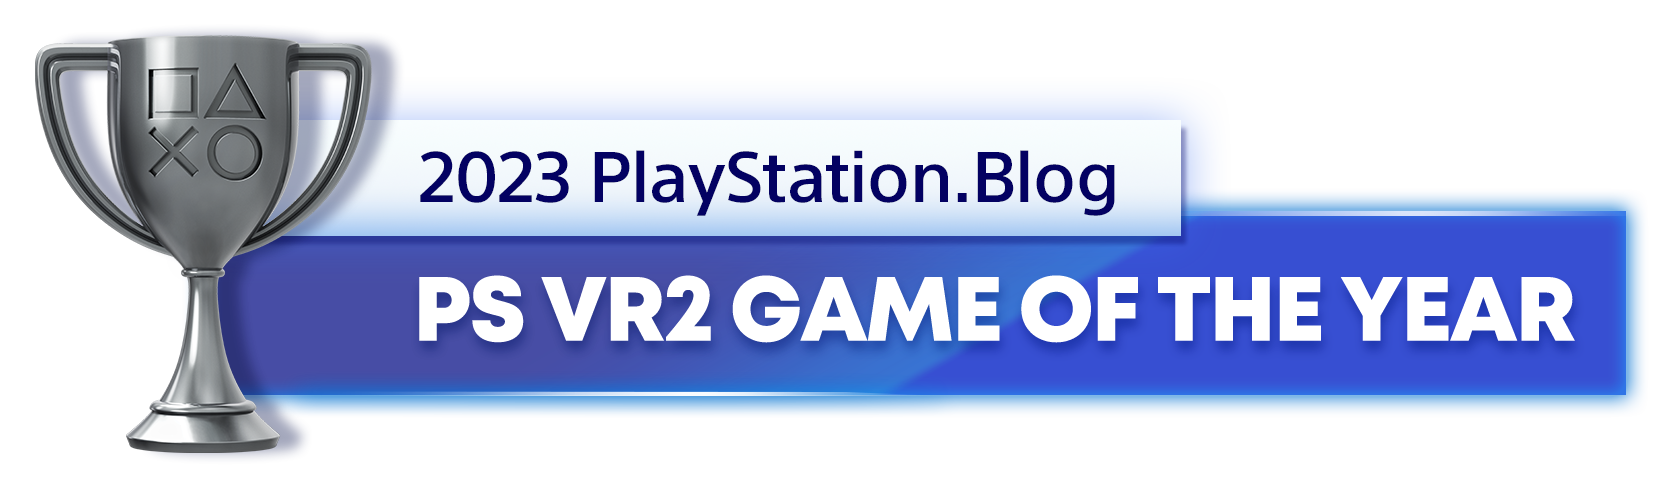  "Silver Trophy for the 2023 PlayStation Blog PS VR2 Game of the Year Winner"